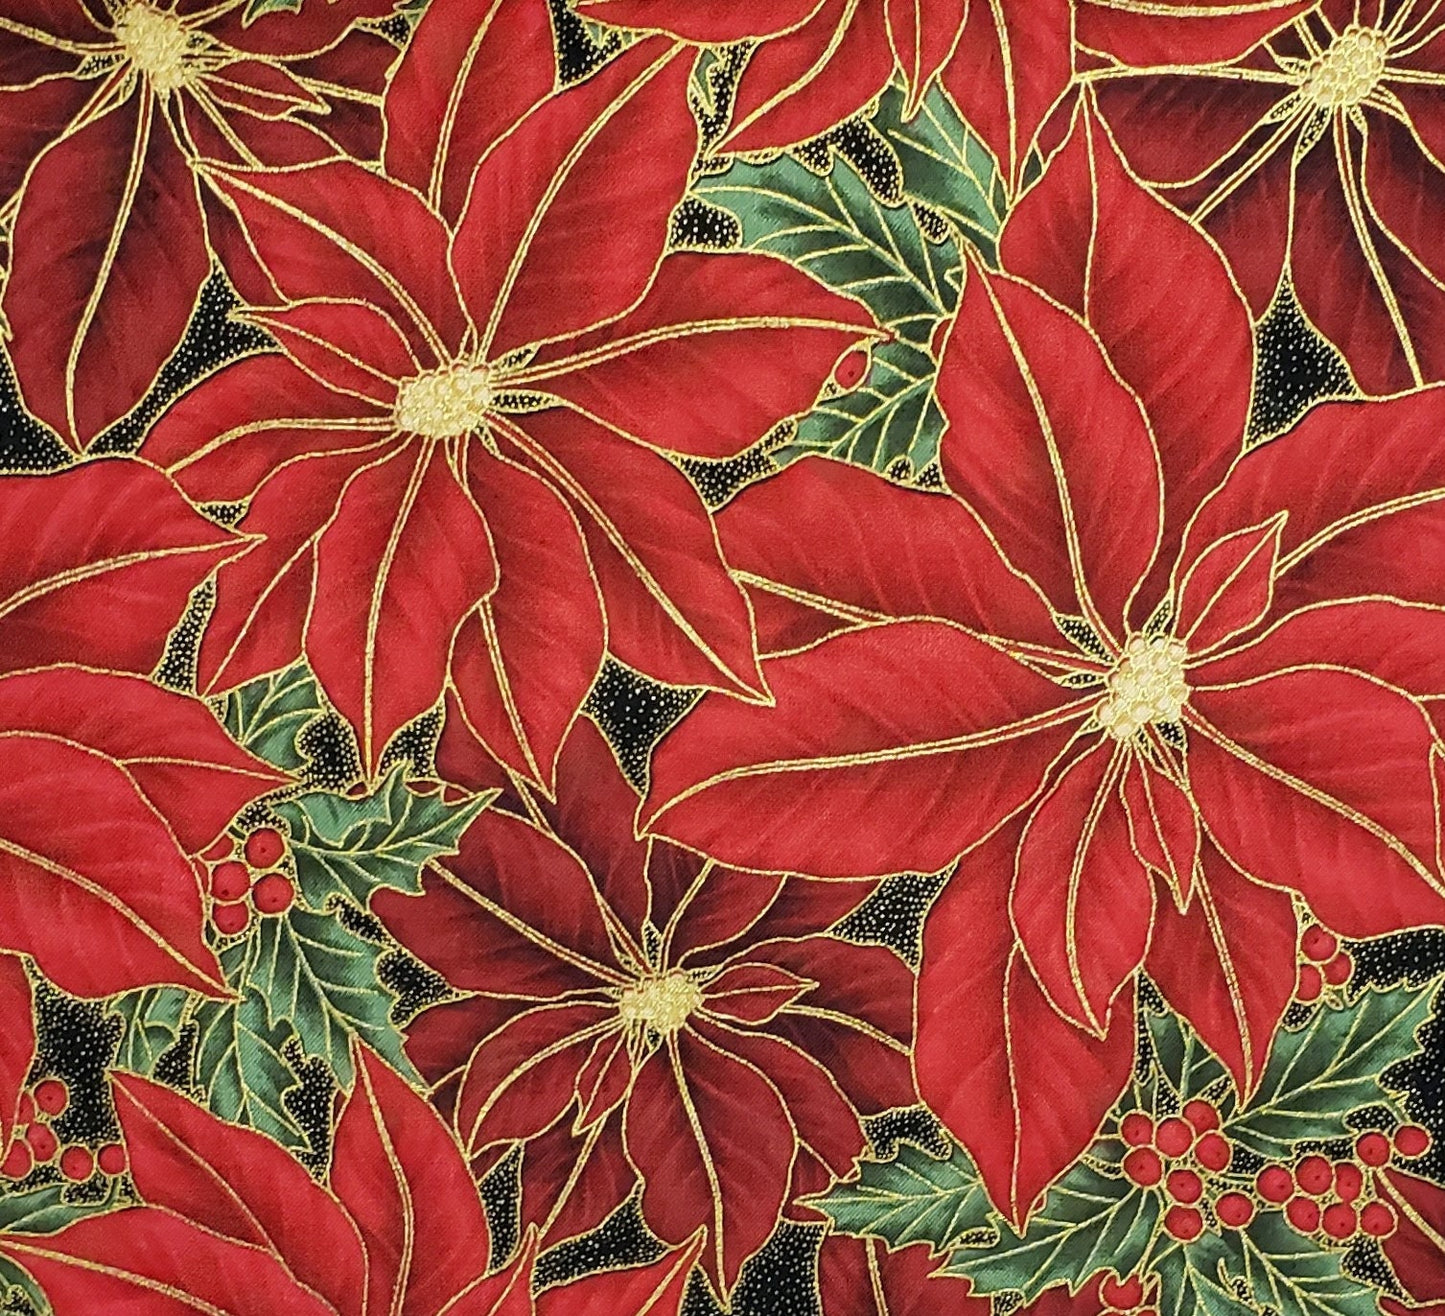 Winter Wishes S#K7173 by Hoffman California International Fabrics - Large Poinsettia Print with Metallic Gold Detailing